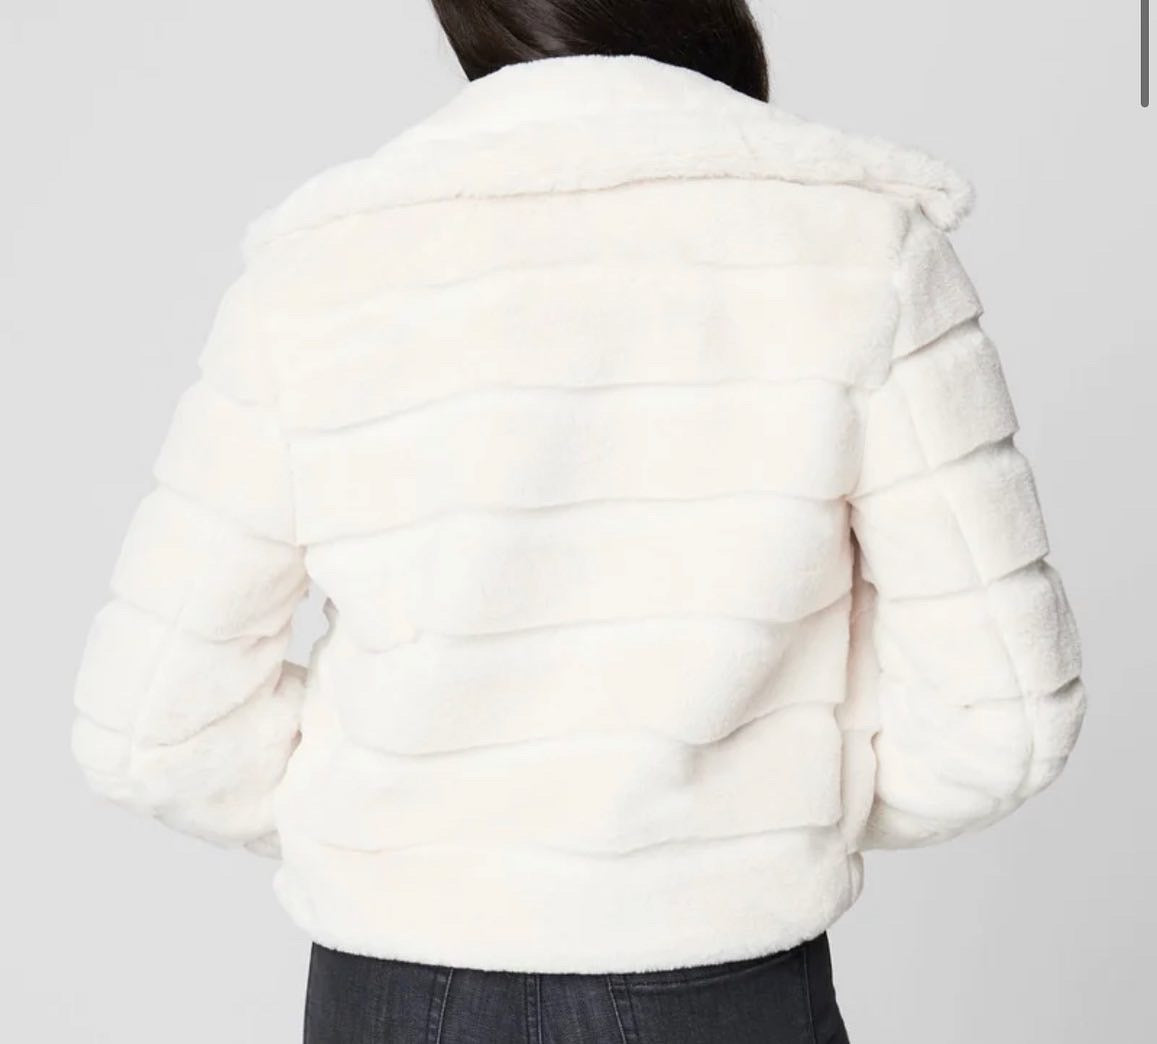 BLANK NYC KIDS FOR A RAINY DAY FAUX FUR JACKET - WHITE